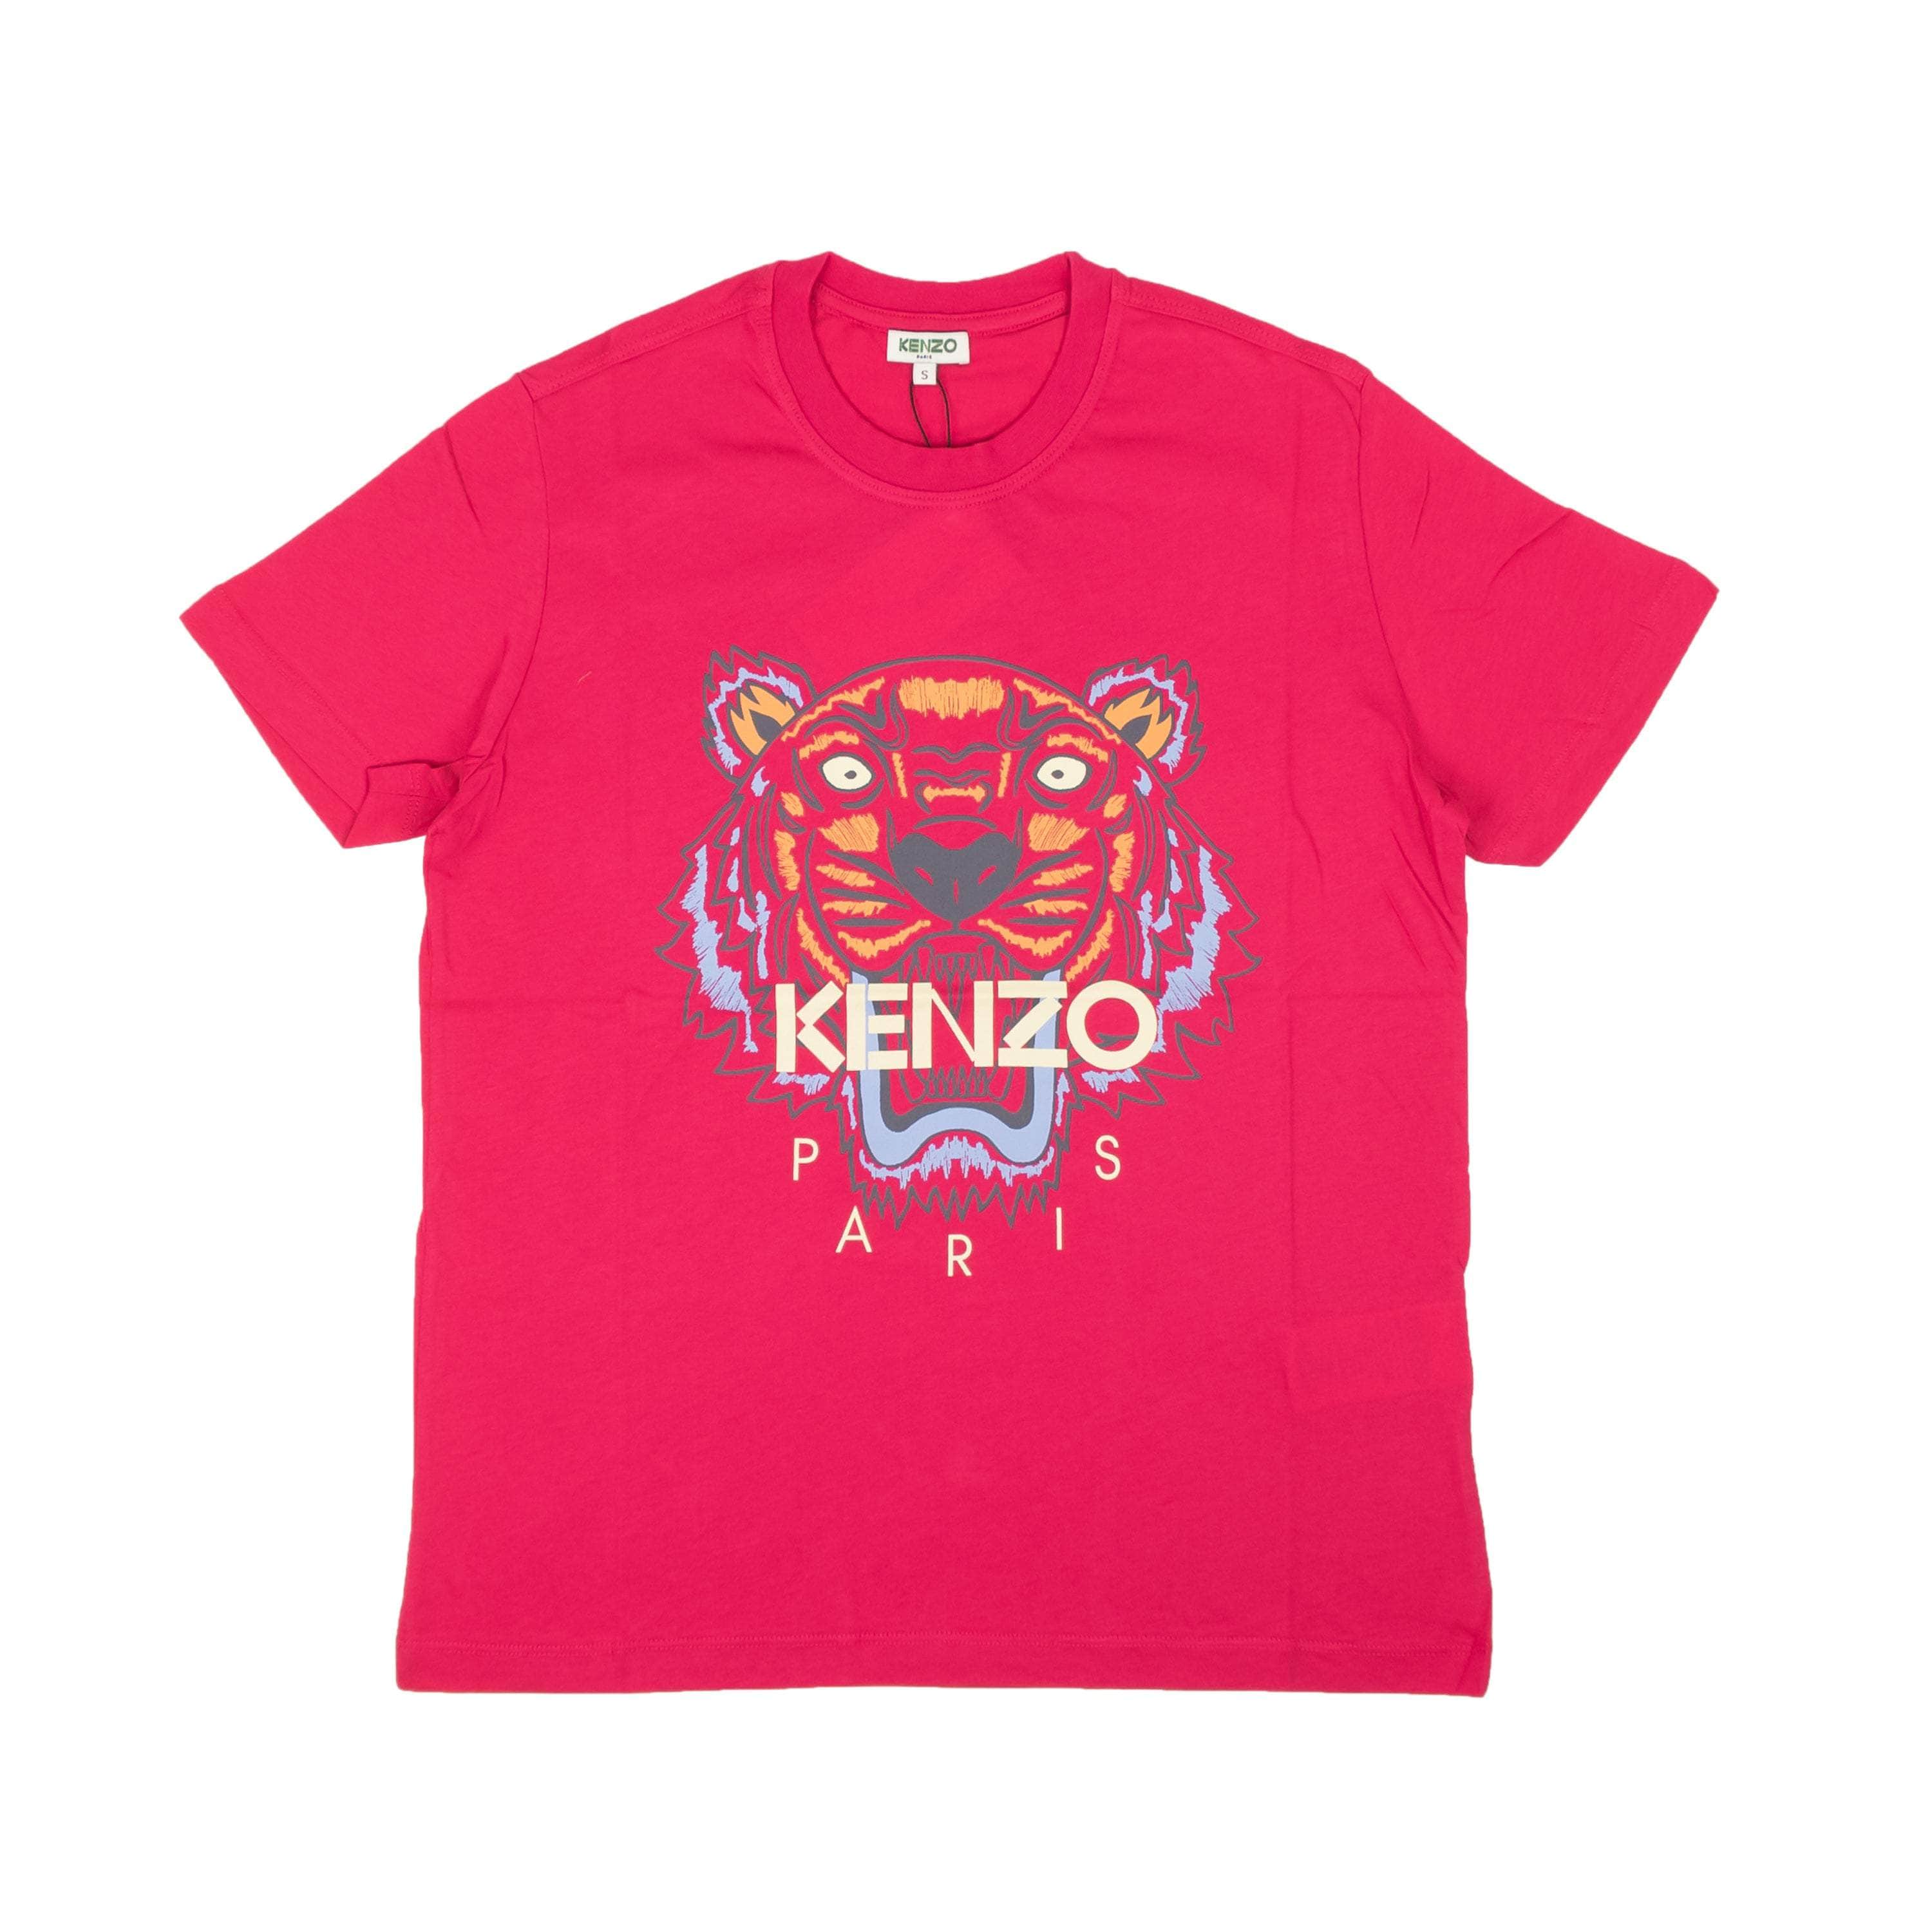 Kenzo Paris channelenable-all, chicmi, couponcollection, gender-mens, kenzo-paris, main-clothing, mens-shoes, size-l, size-m, size-s, size-xl, under-250 Pink Classic Tiger Short Sleeve T-Shirt